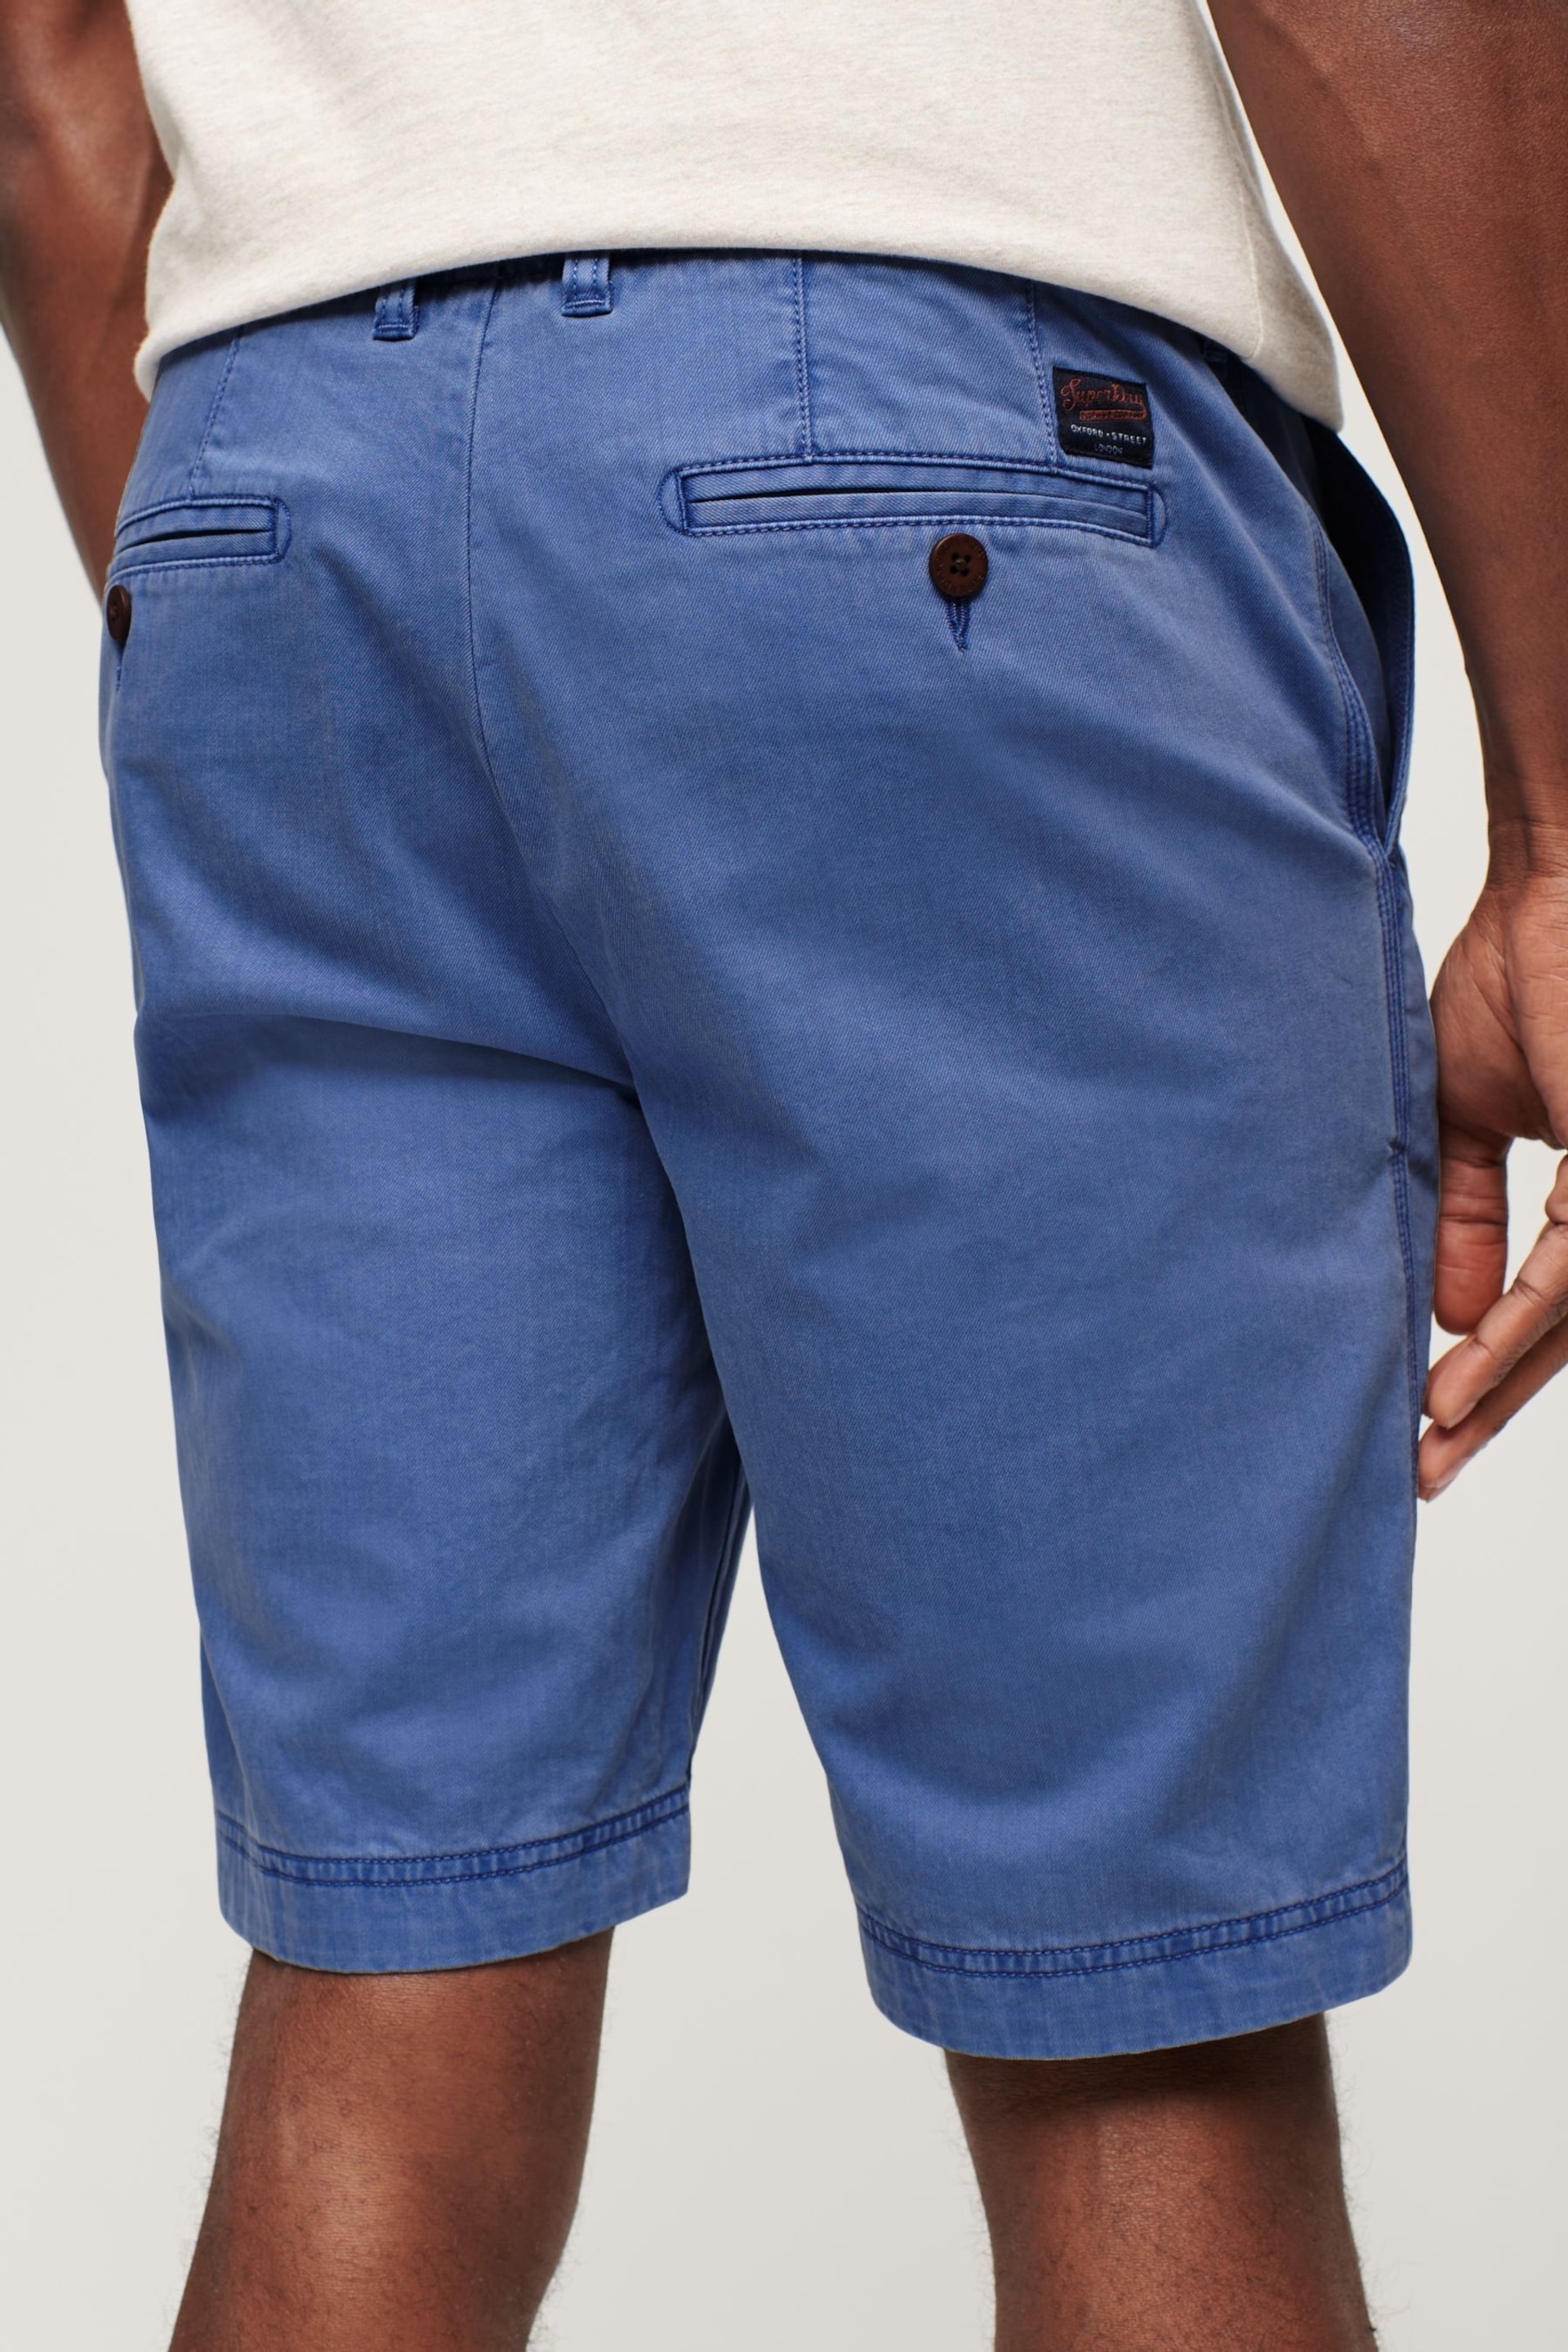 Superdry Blue Officer Chino Shorts - Image 2 of 4